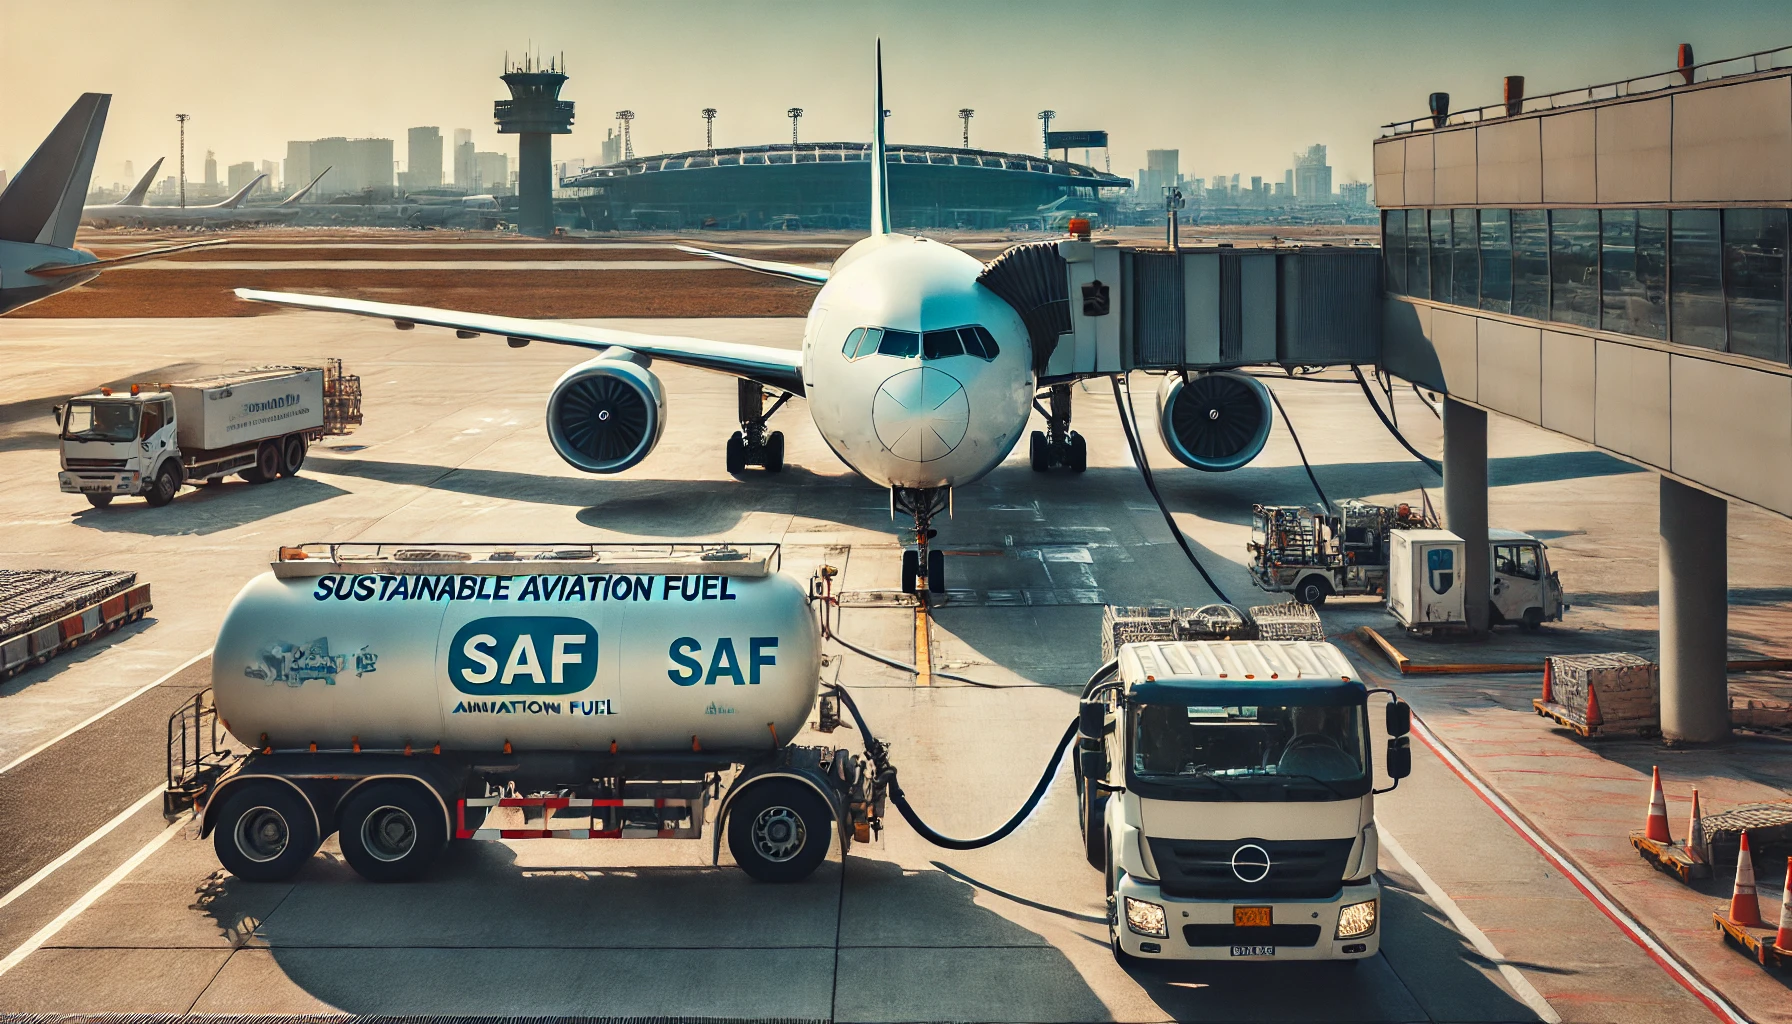 An airplane on the tarmac is being refueled with SAF from a fuel truck. Ground support vehicles and workers are visible around the plane. Airport terminals and the city skyline are in the background under a clear sky.